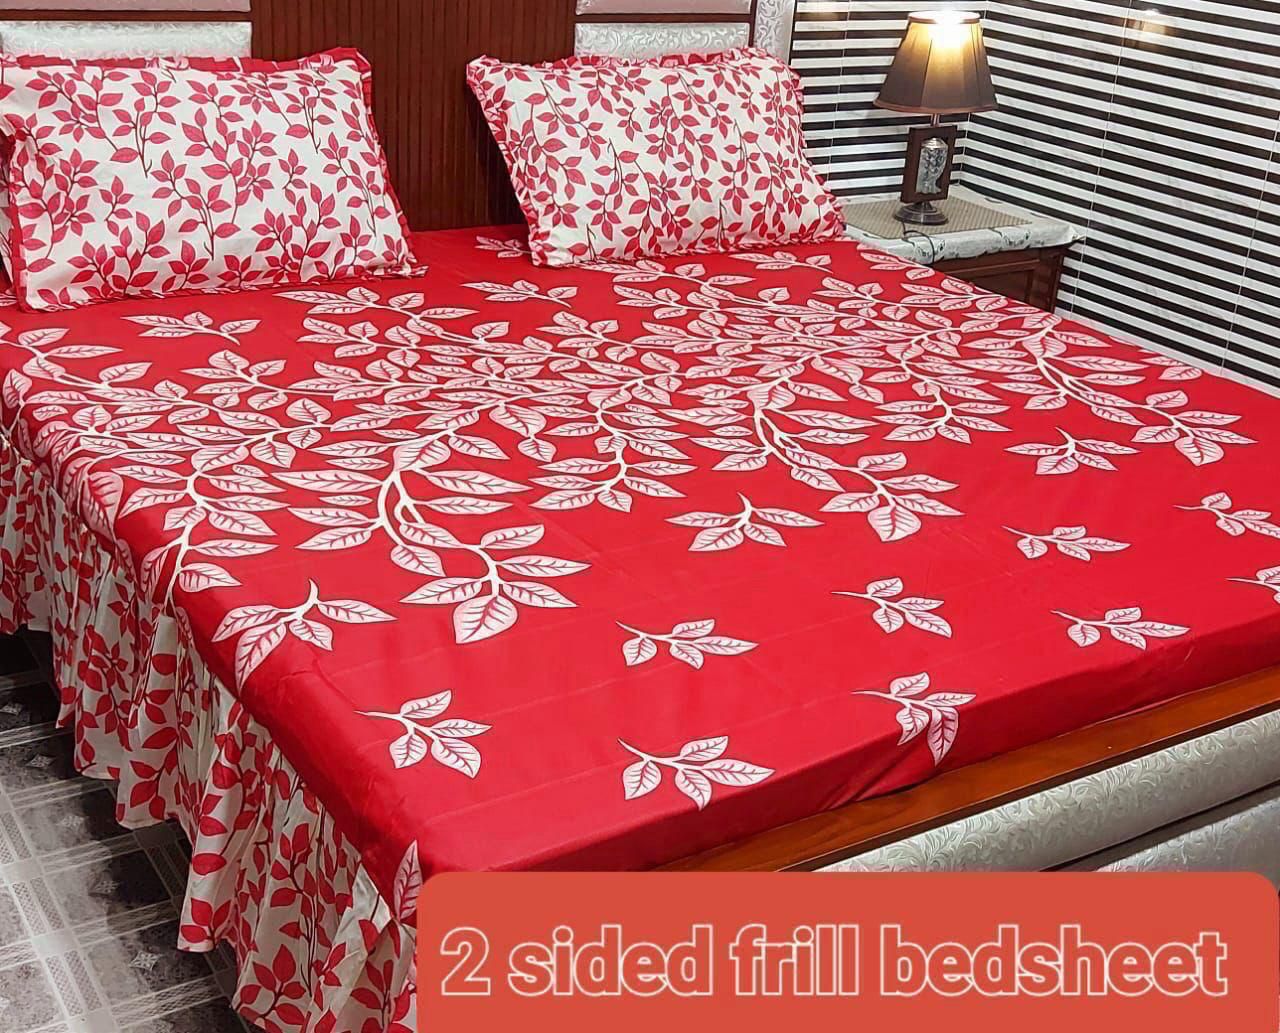 Chic 3-Piece Stitched Bedsheet Set with 2-Sided Frill: High Cotton Salonica Fabric, King Size